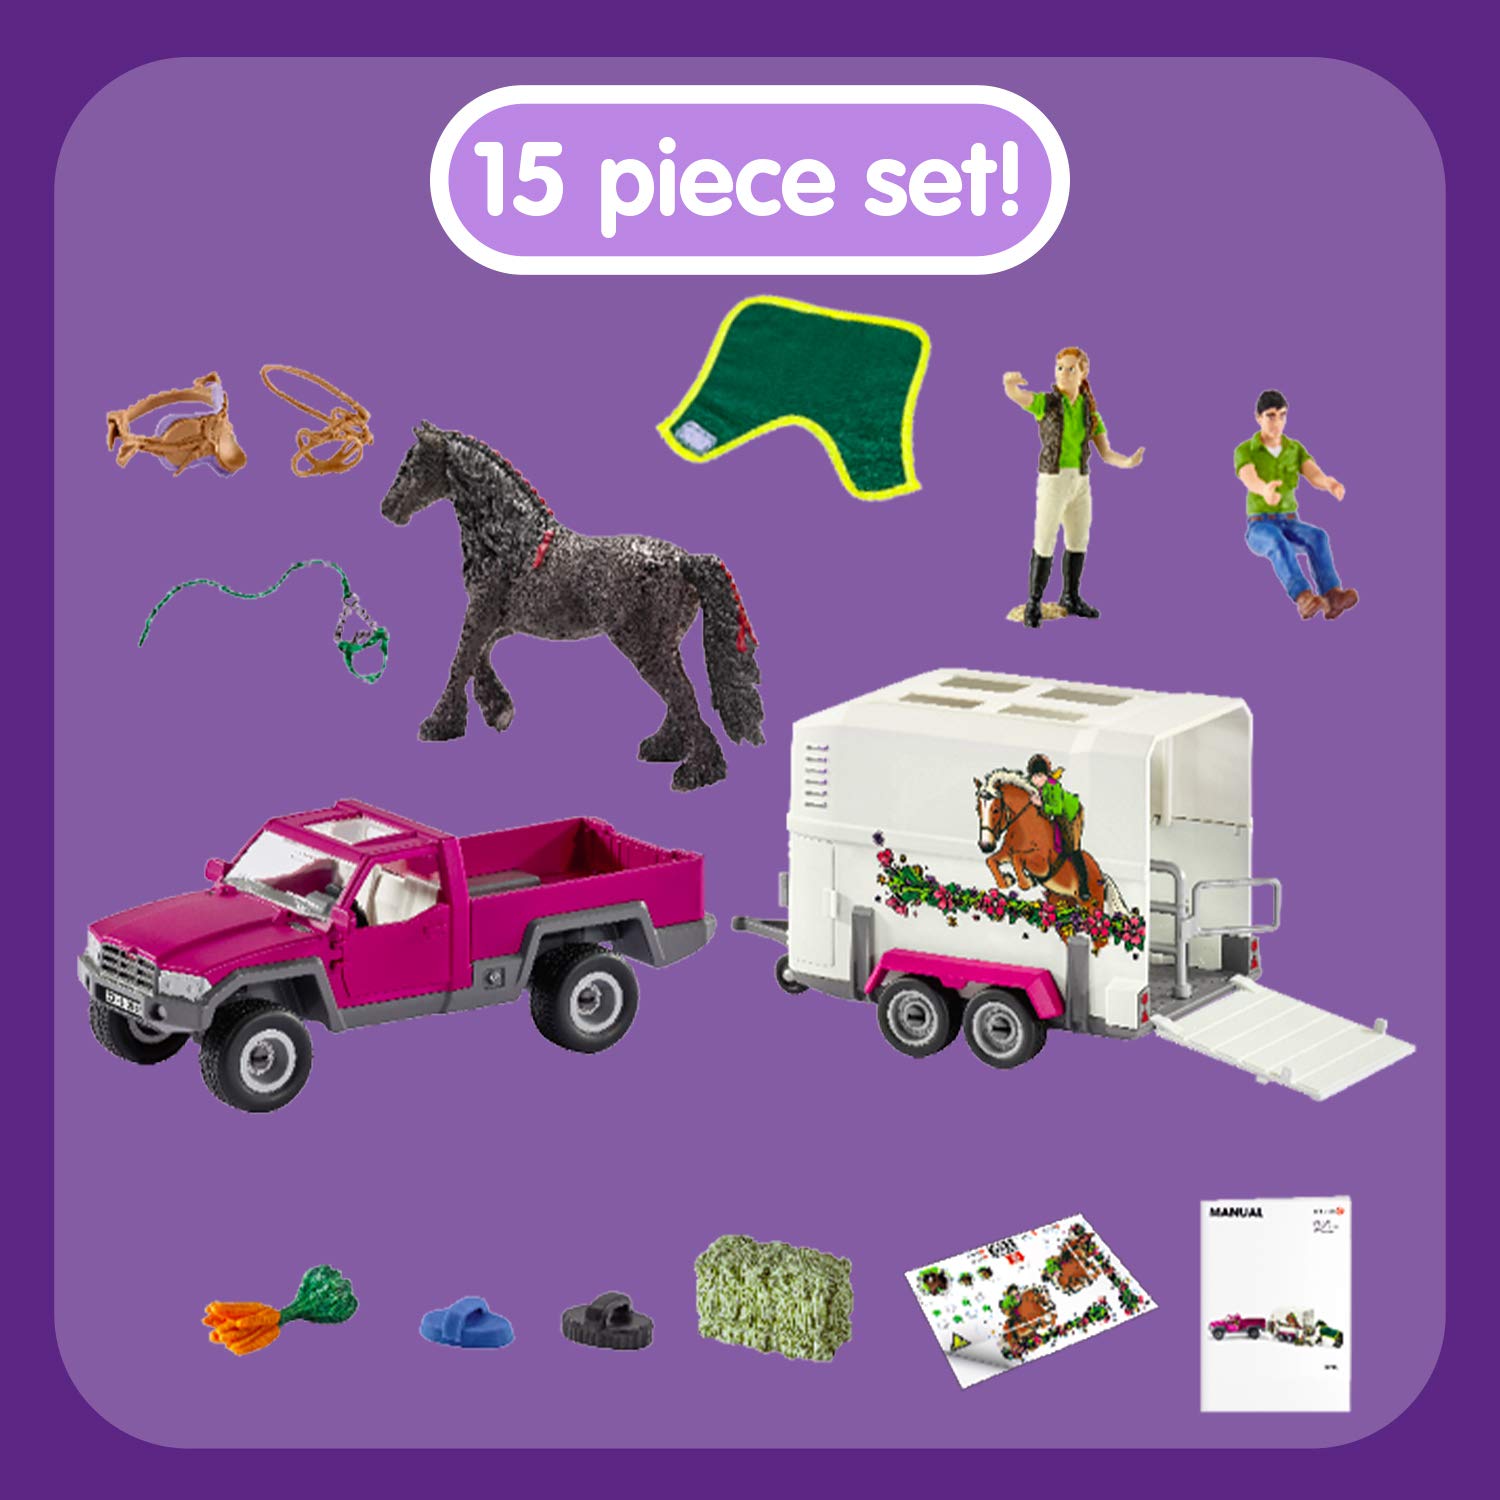 Schleich Horse Truck and Trailer Toys – 14 Piece Pickup Truck & Trailer Playset, with Horse Figurine, Rider Action Figure, and Pony Accessories, for Girls and Boys Ages 5 and Above